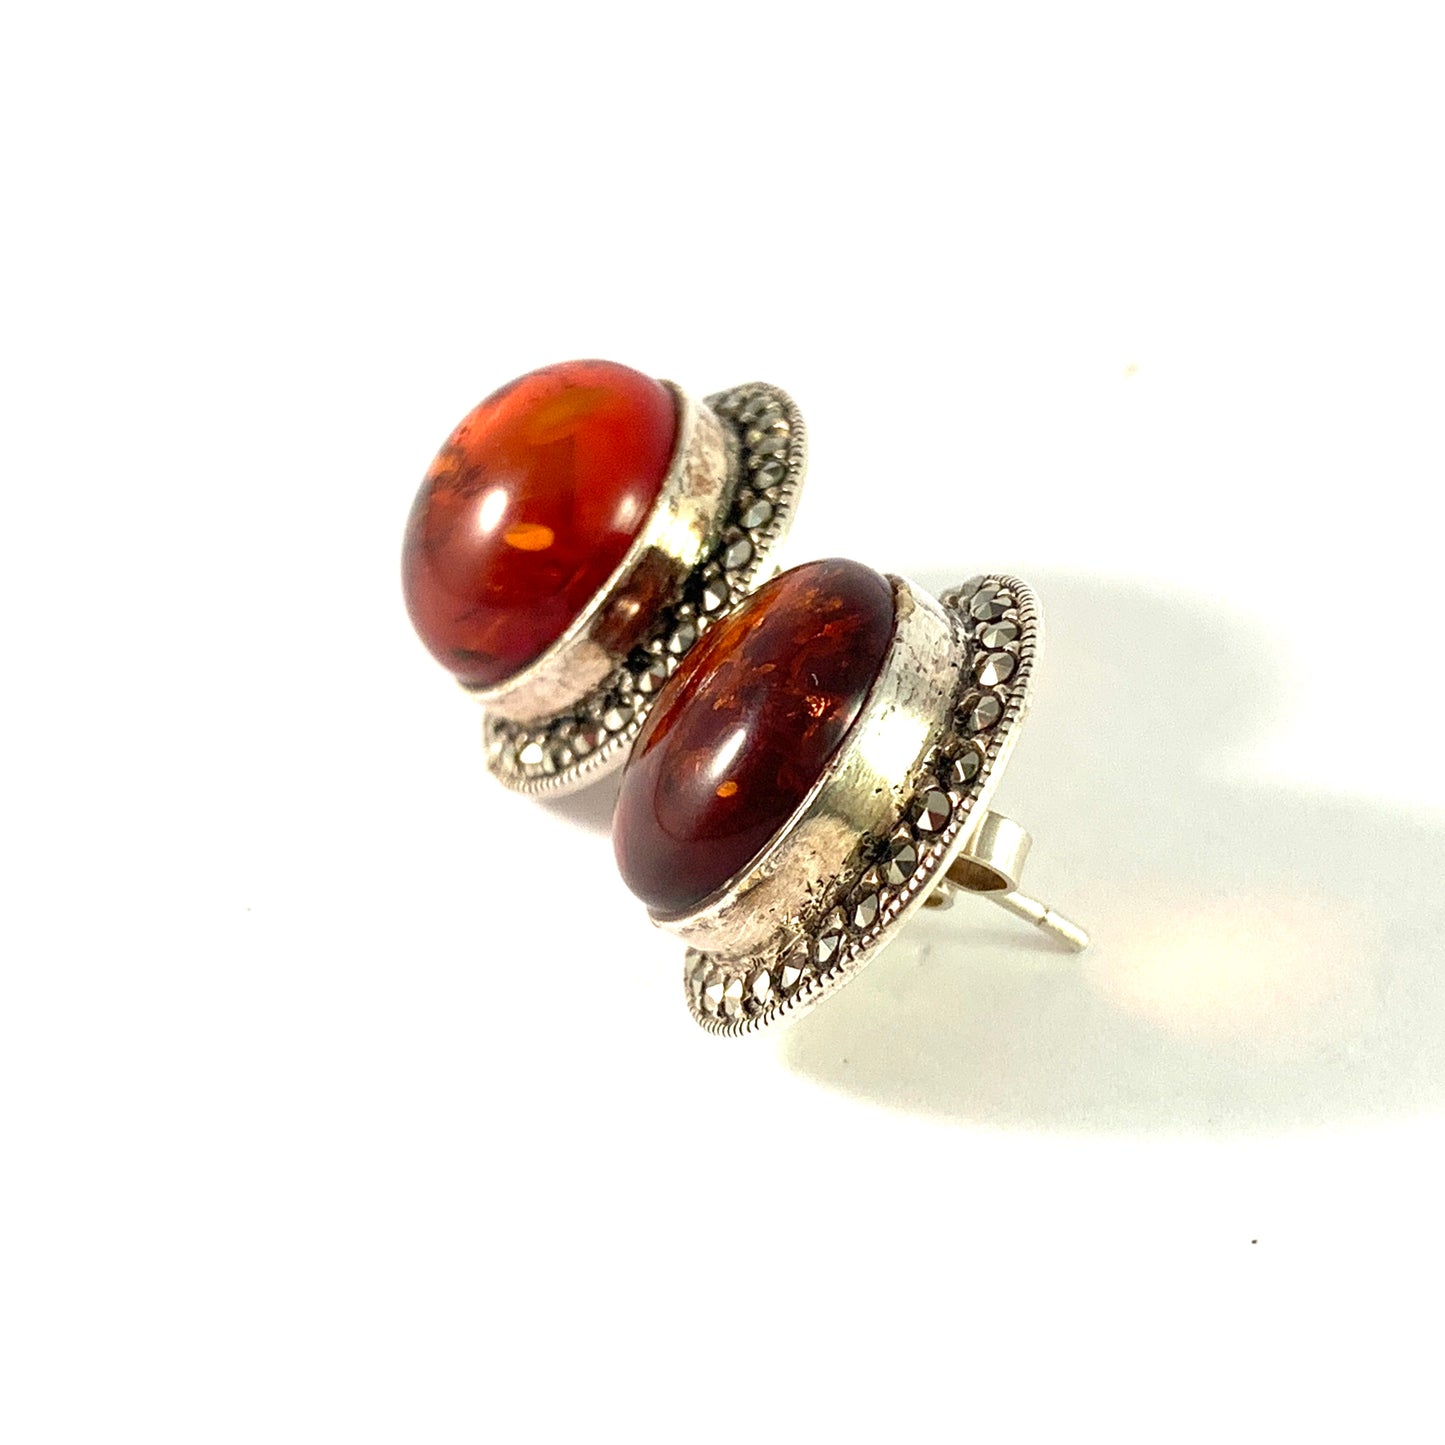 Maker TH, North Continental Europe Vintage Sterling Silver Amber Marcasite Large Stud Earrings.